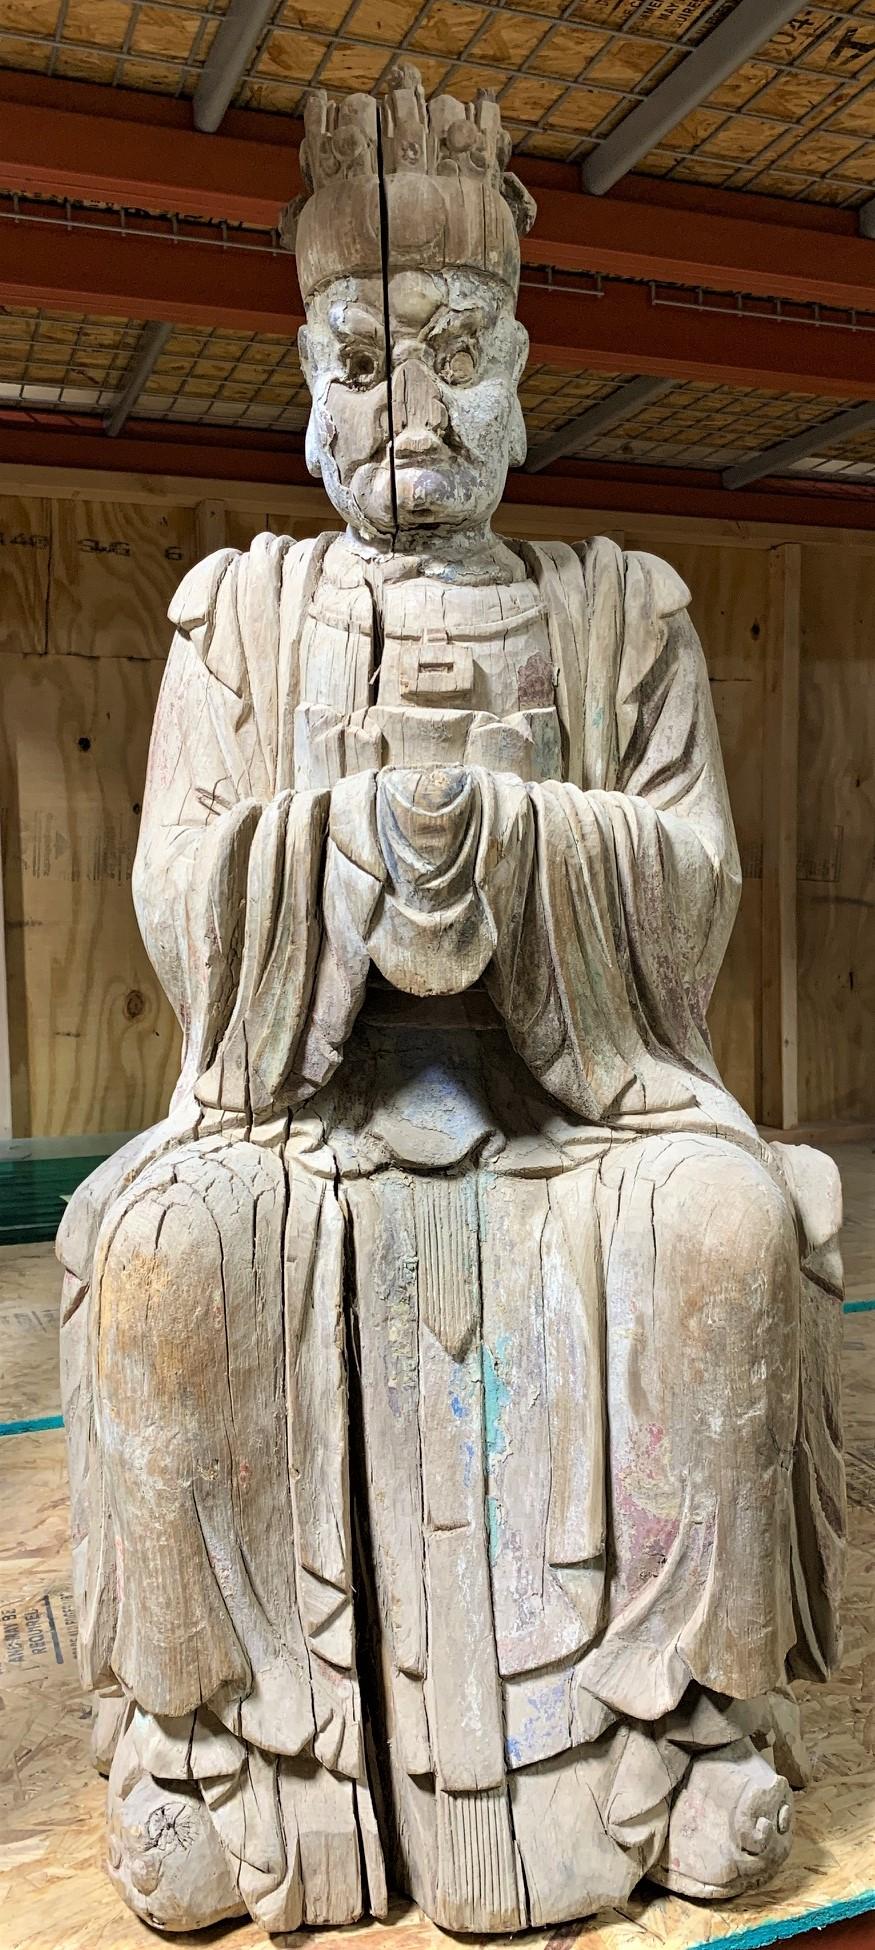 Remarkable 16th century Ming dynasty hand carved wood sculpture of a Buddhist deity donning a crown and dressed in loose robe with heavy folds about the legs, arms, and body. Retains traces of color pigment. The piece is now mounted to a museum